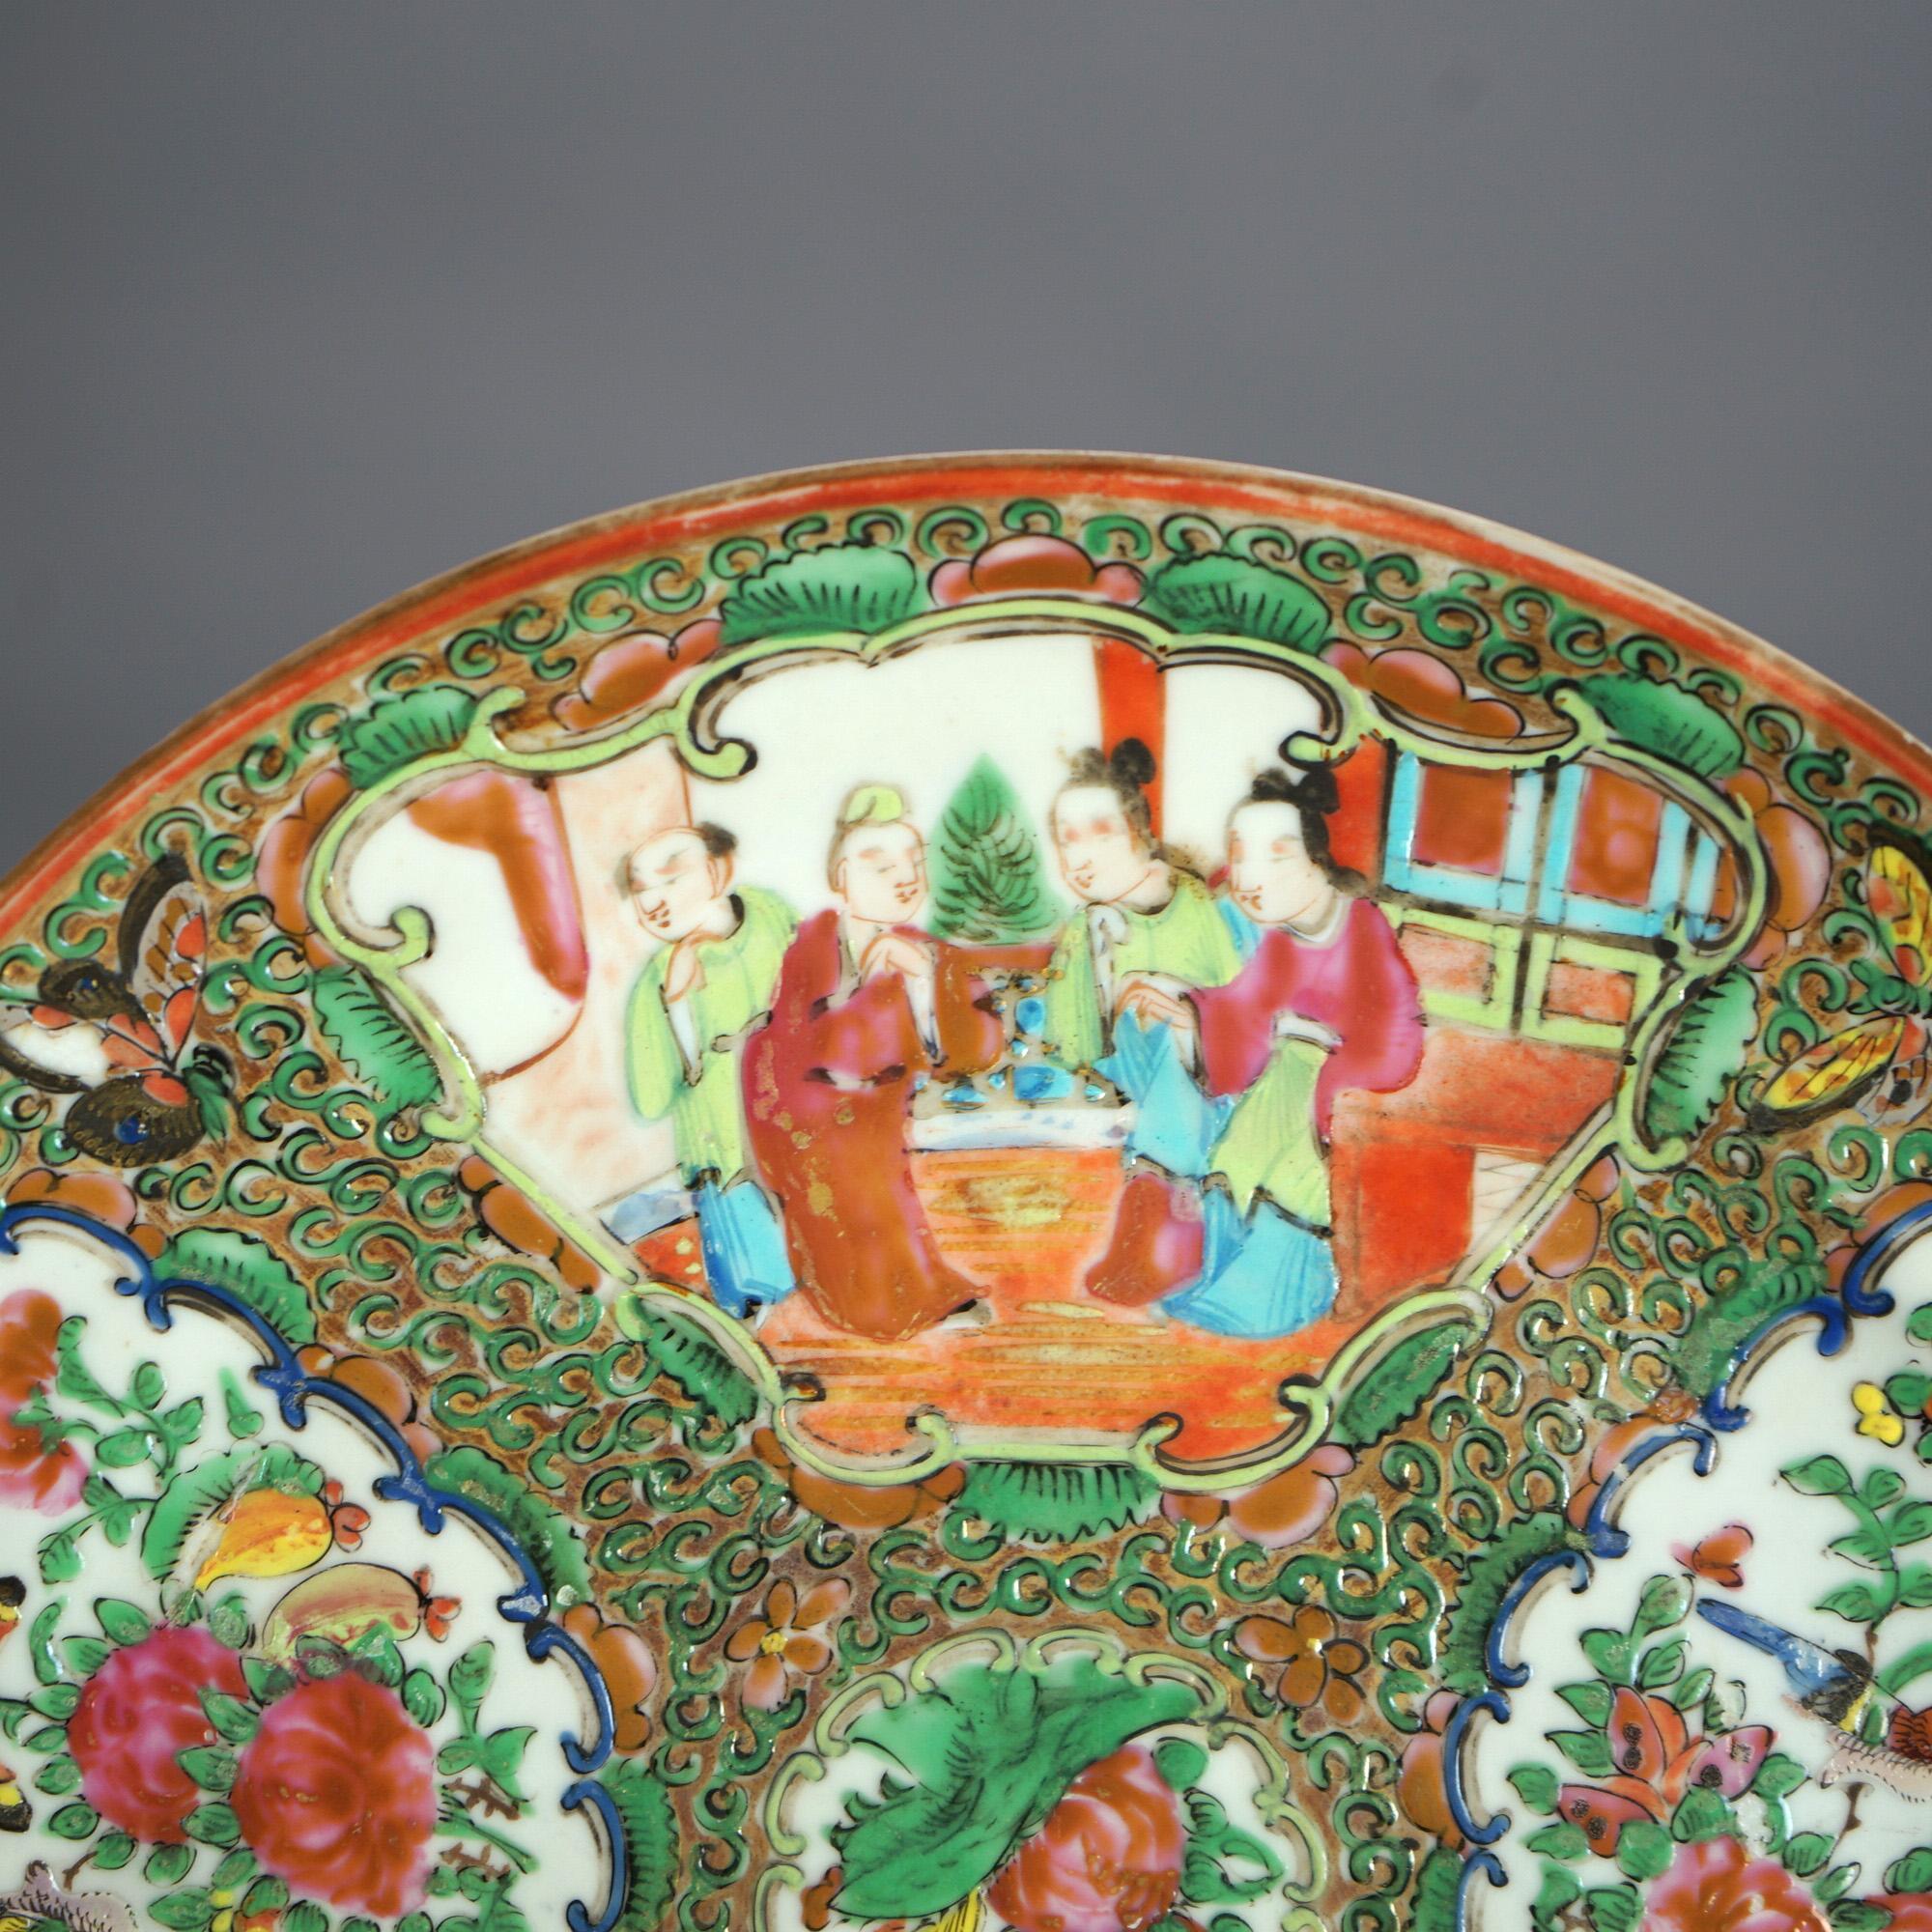 Antique Chinese Rose Medallion Porcelain Plate with Gardens & Figures C1900 For Sale 1